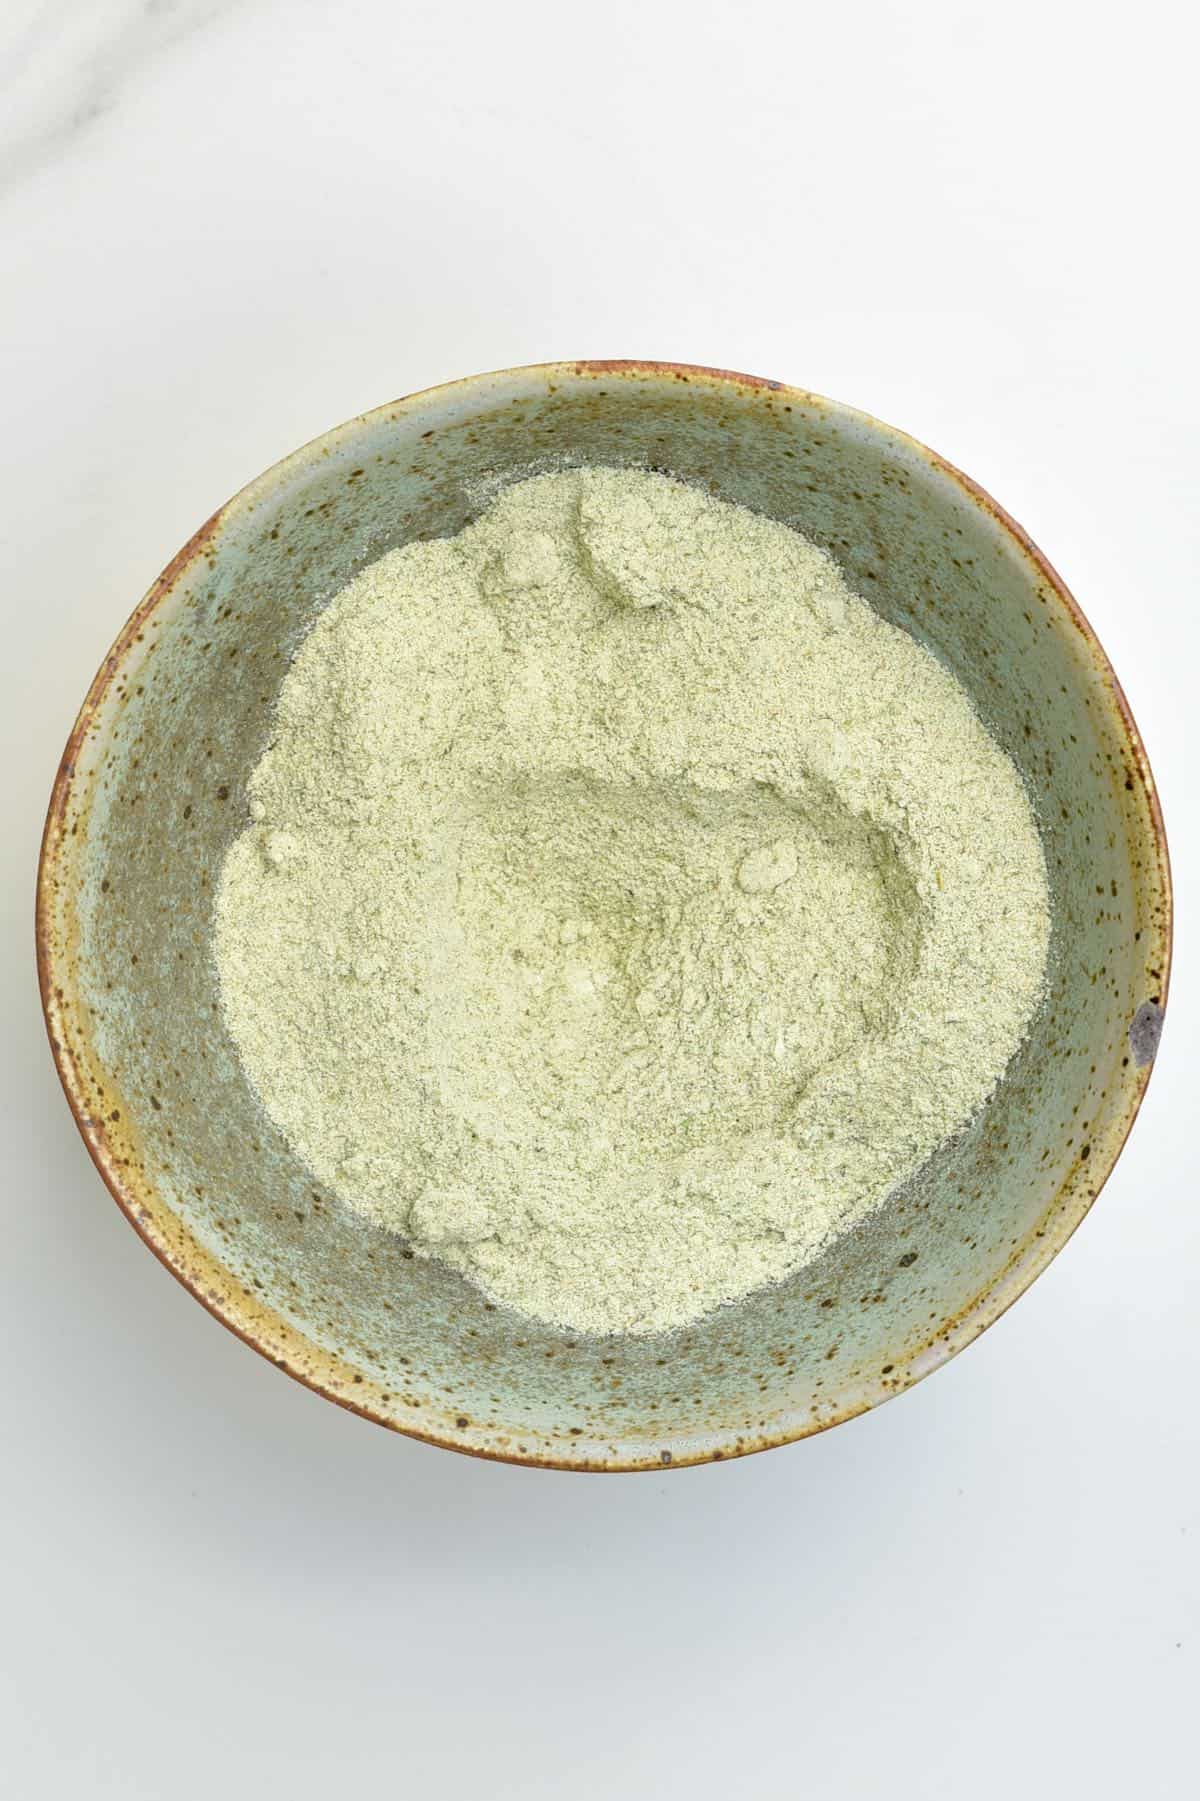 A bowl with finely ground herb salt